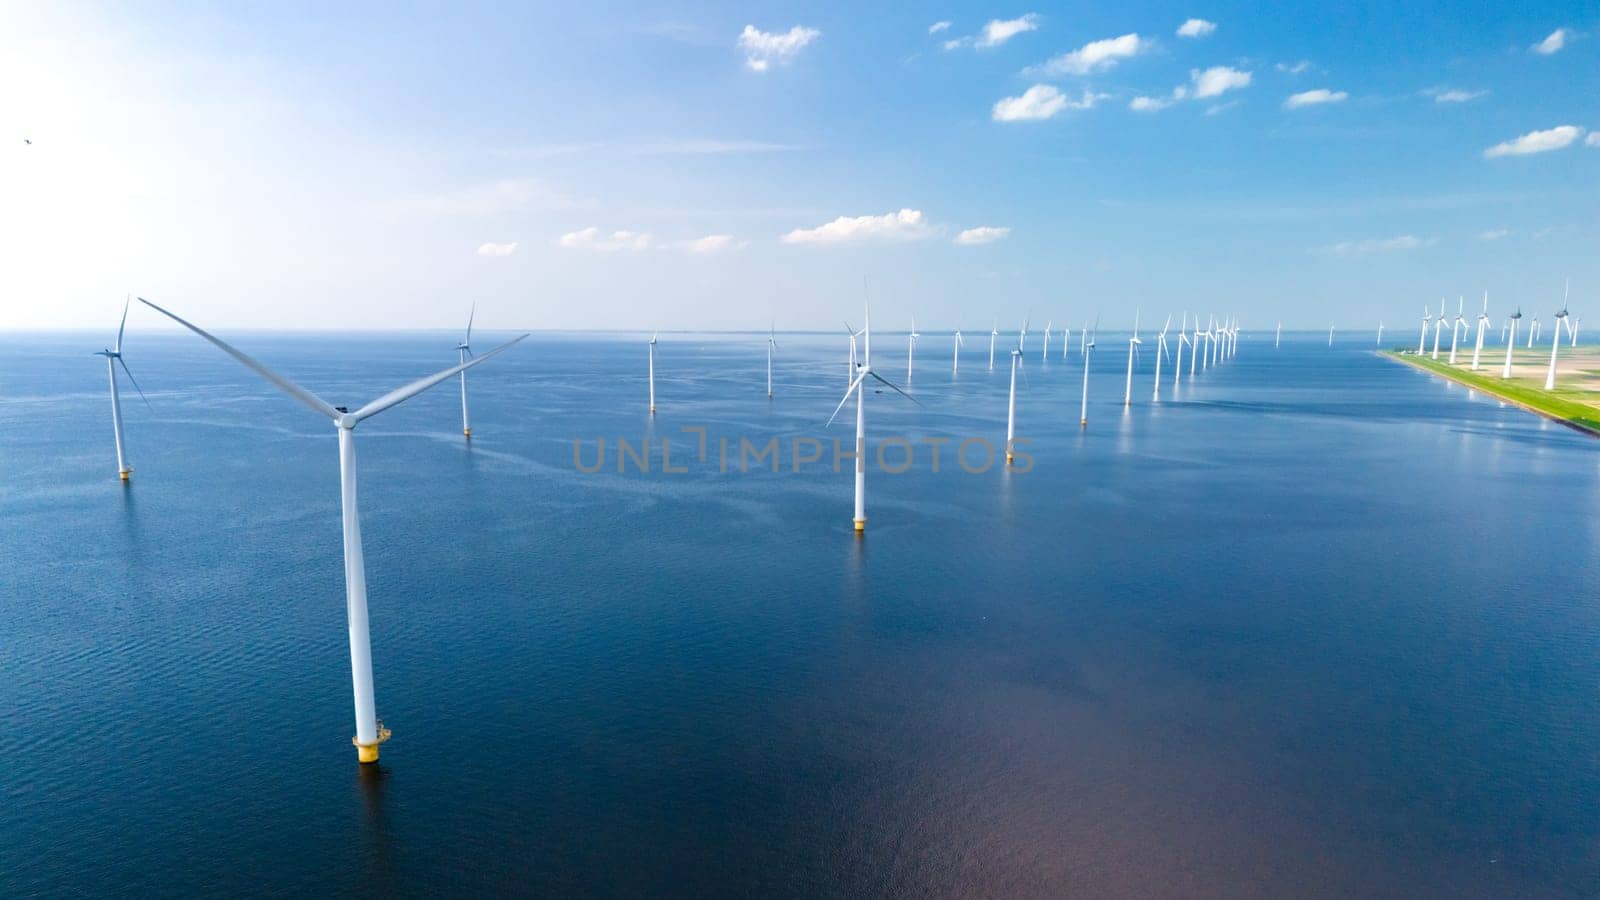 A serene large body of water is dotted with numerous windmills spinning gracefully in the wind, creating a mesmerizing and sustainable energy dance.